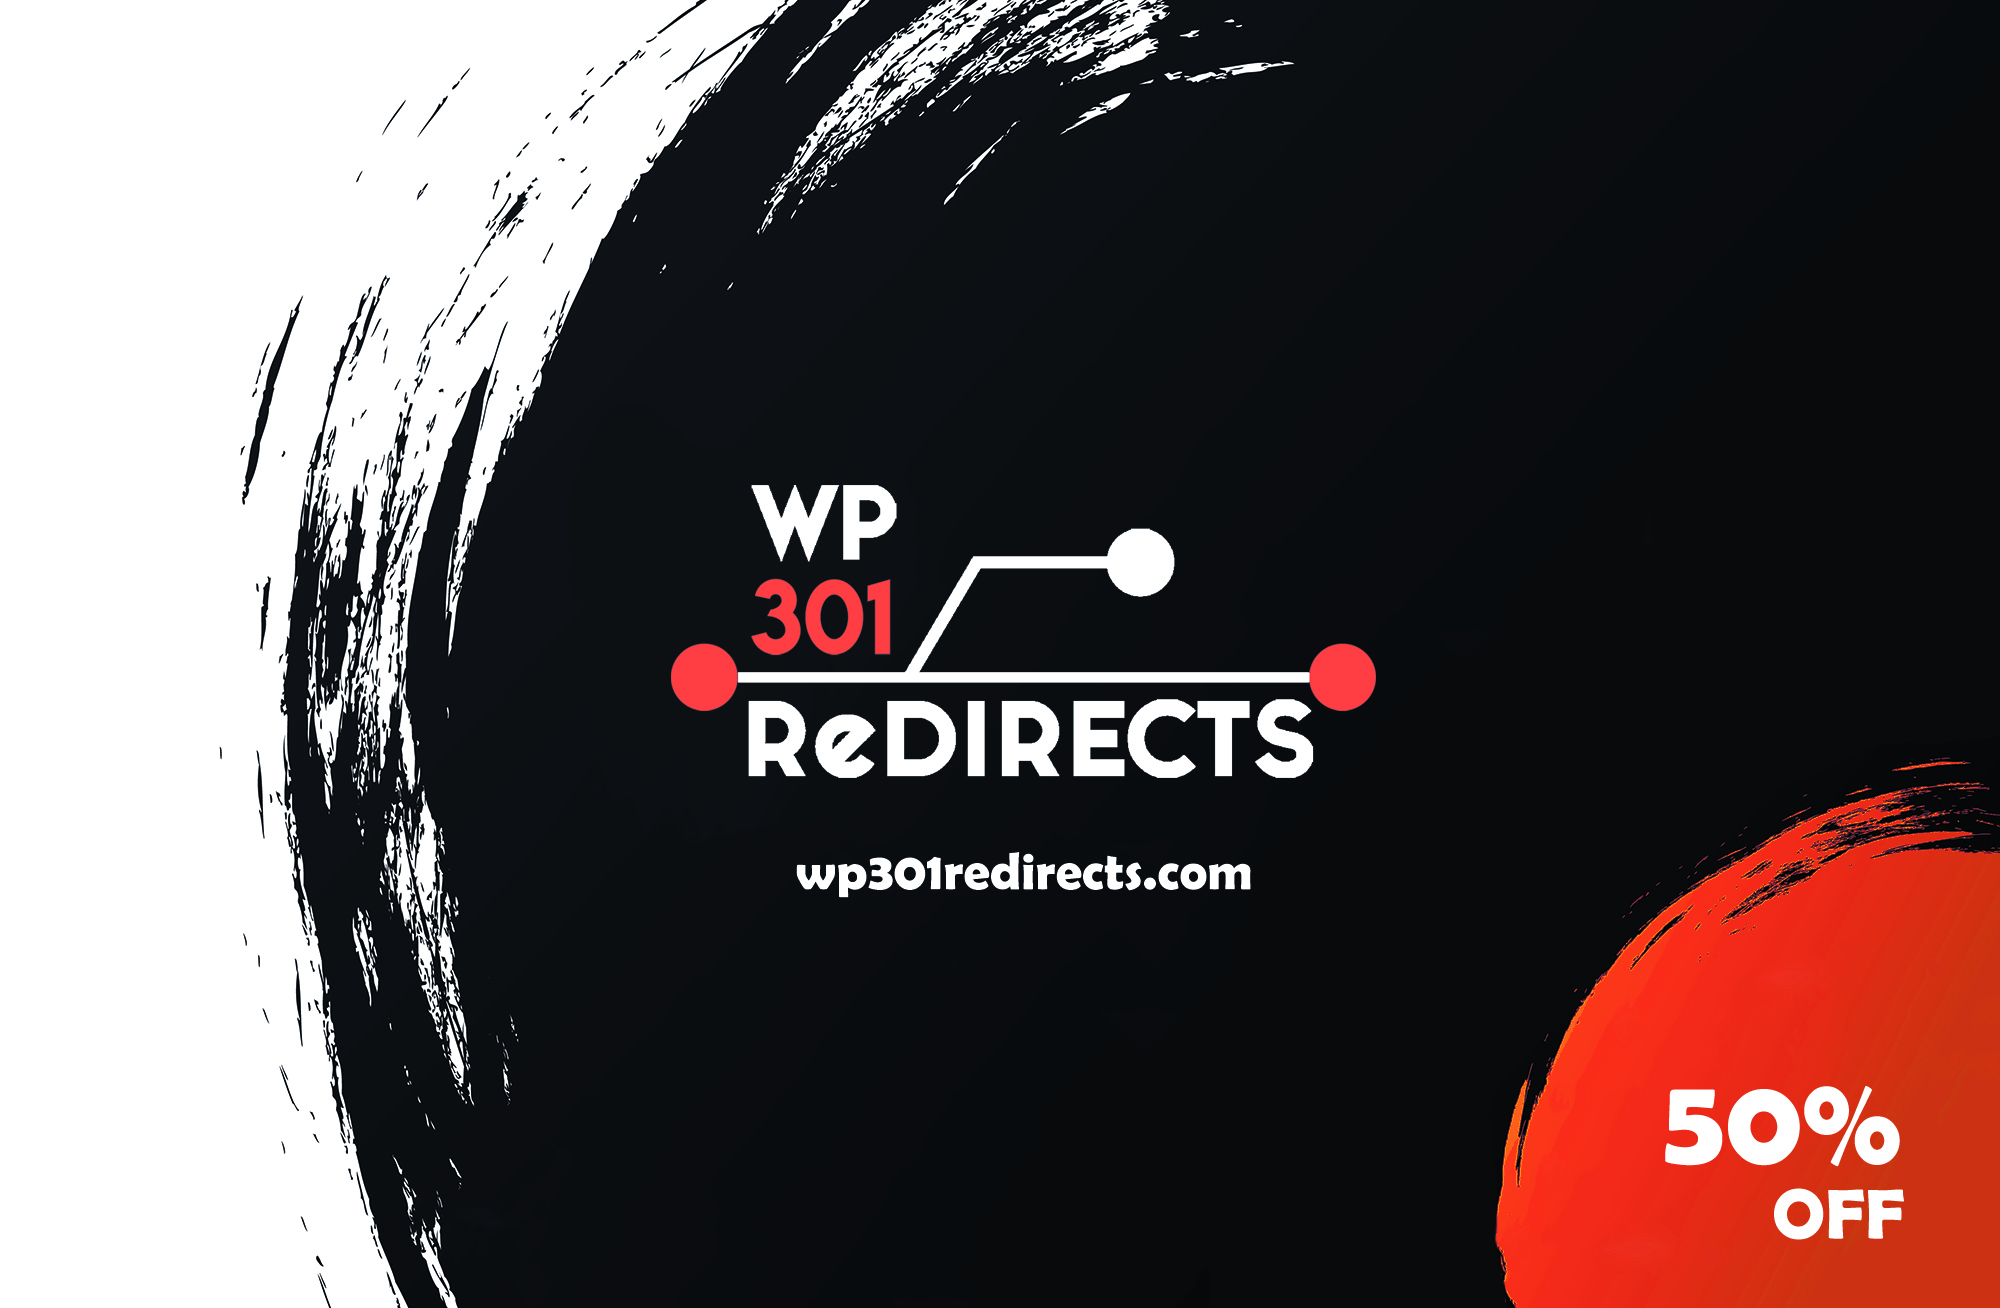 bf-wp301redirects